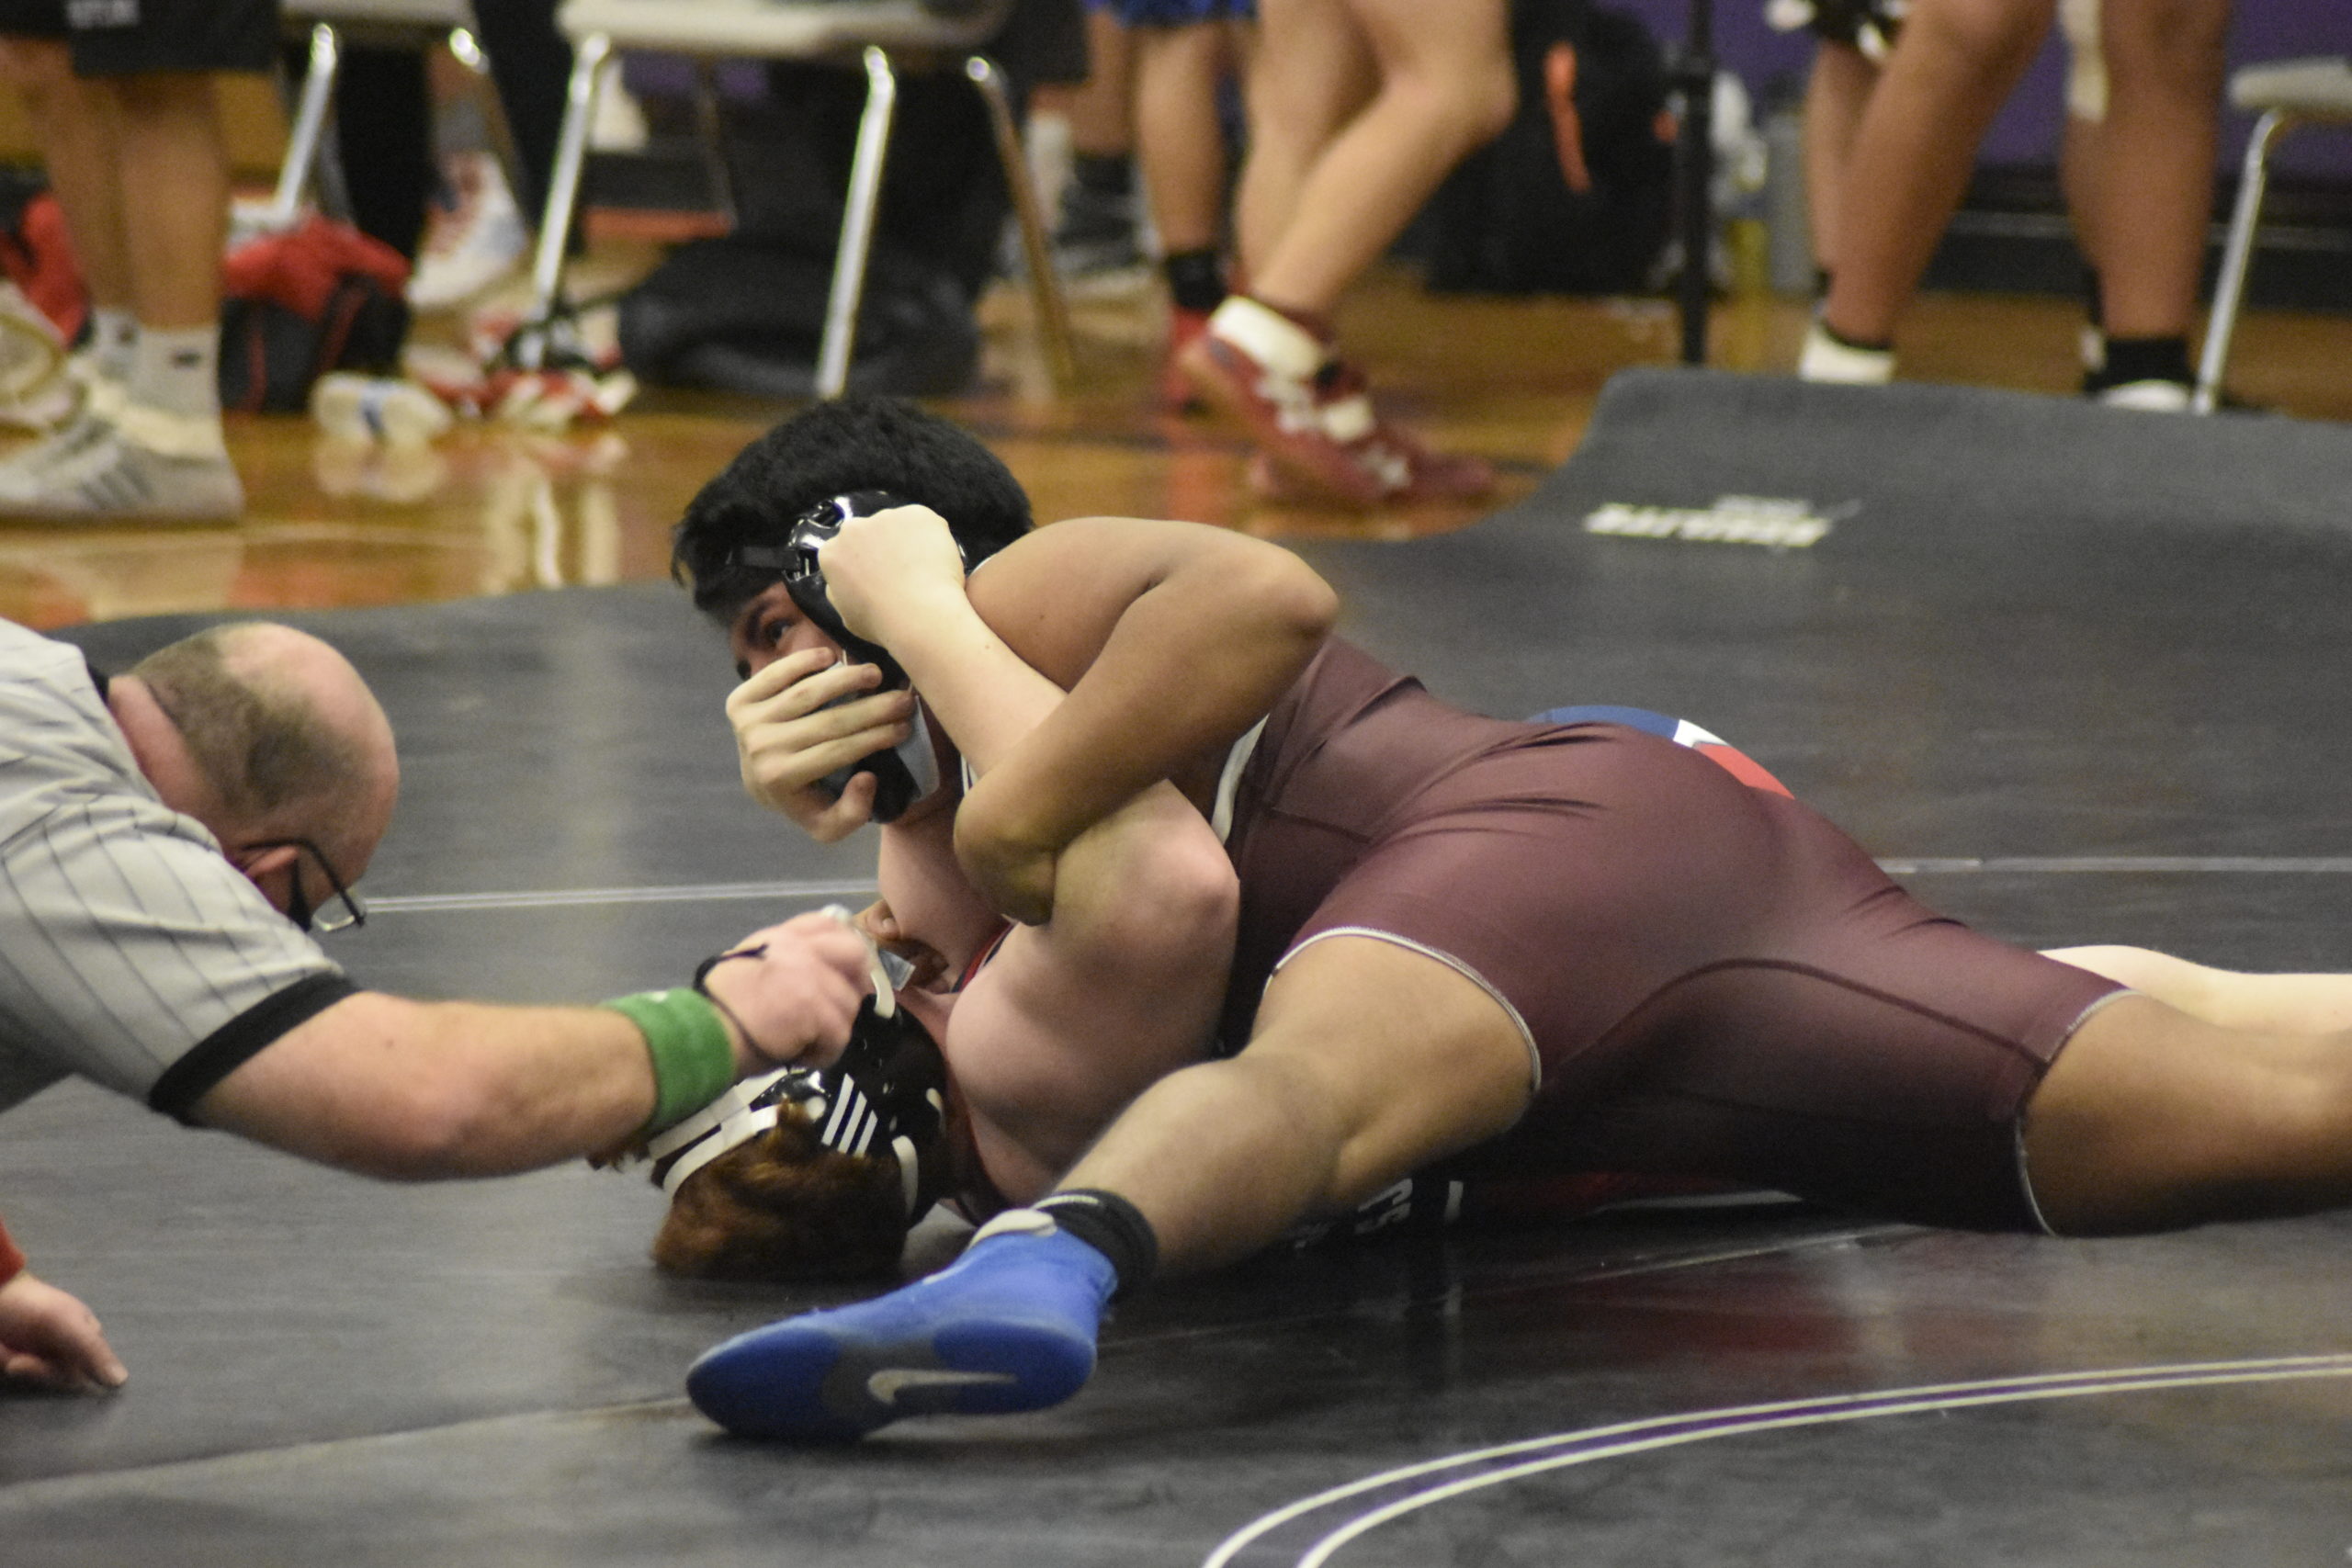 Southampton's Johan Moraxtitla pinned his St. John The Baptist opponent in 26 seconds on Saturday.